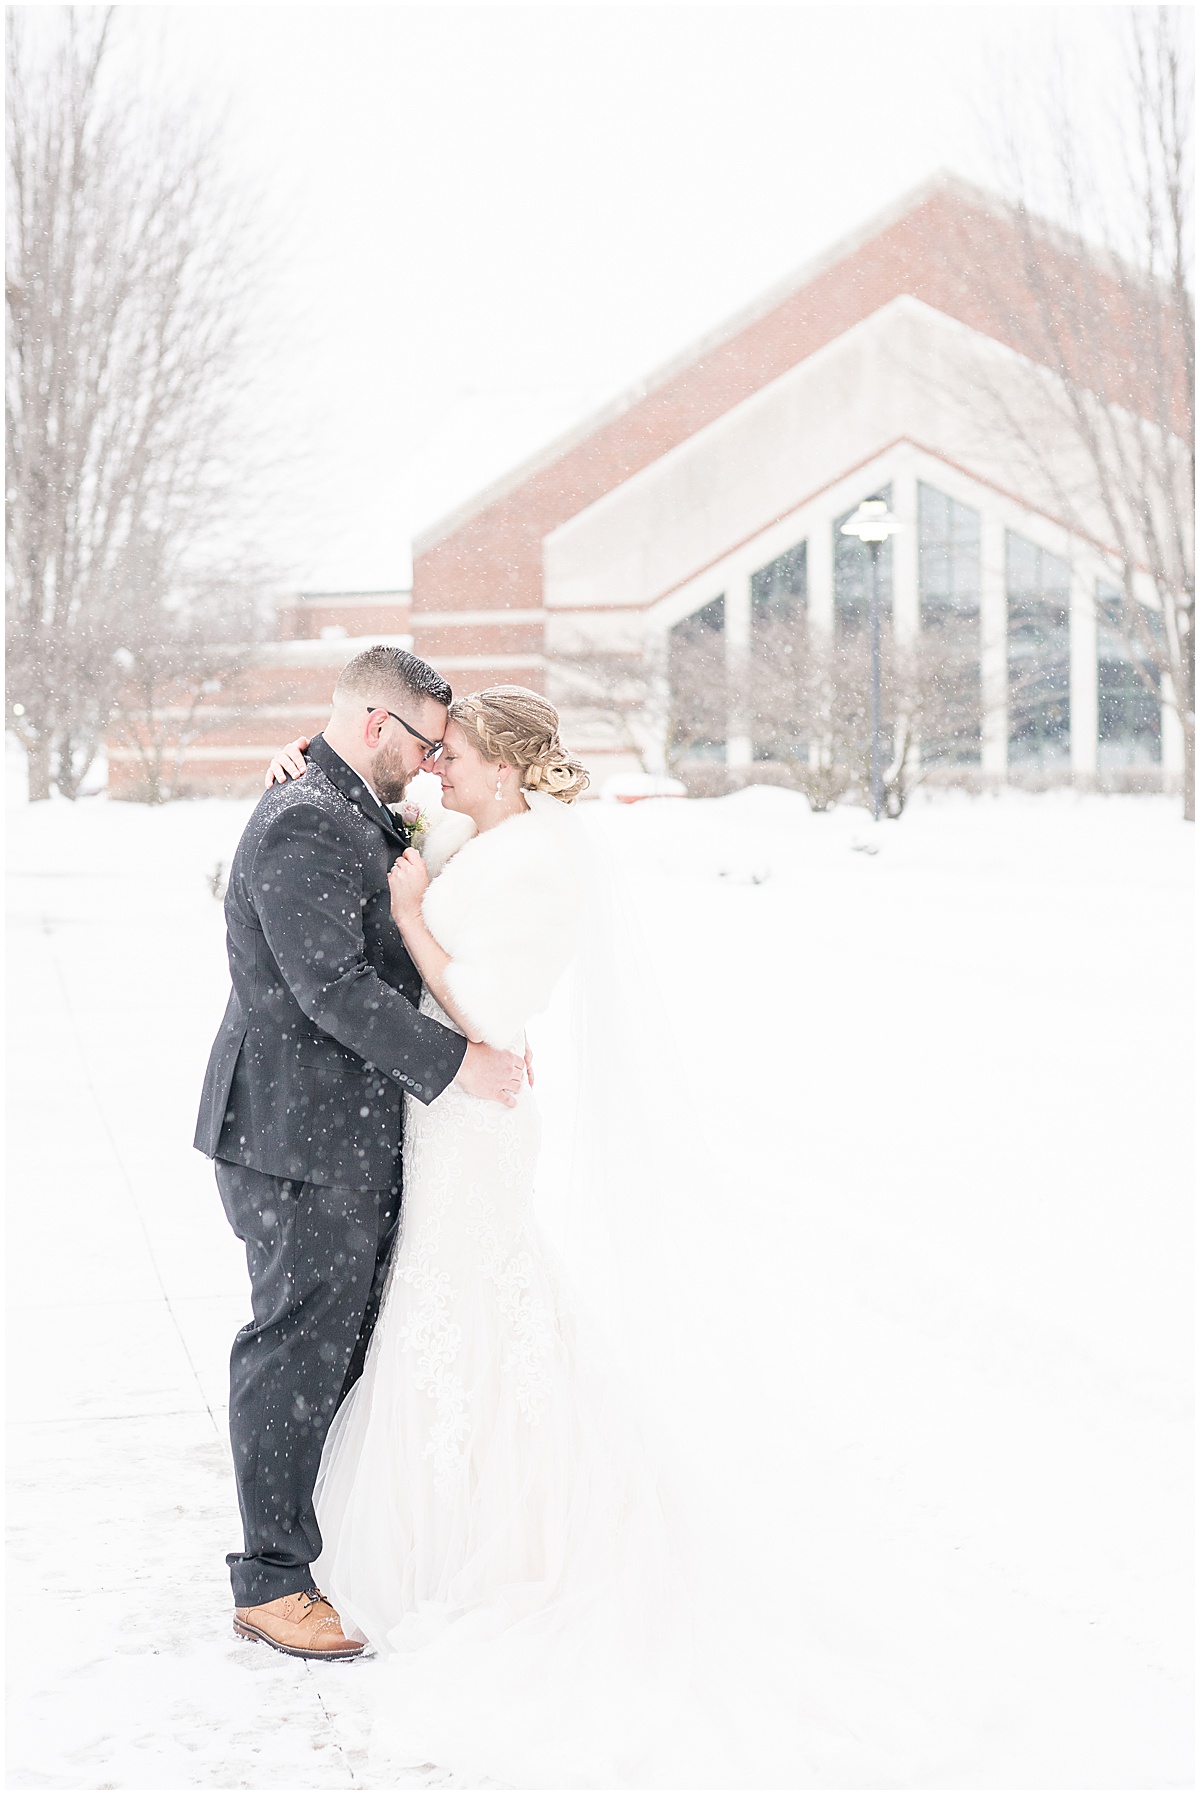 Winter wedding photos at Trinity Christian College in Chicago by Victoria Rayburn Photography